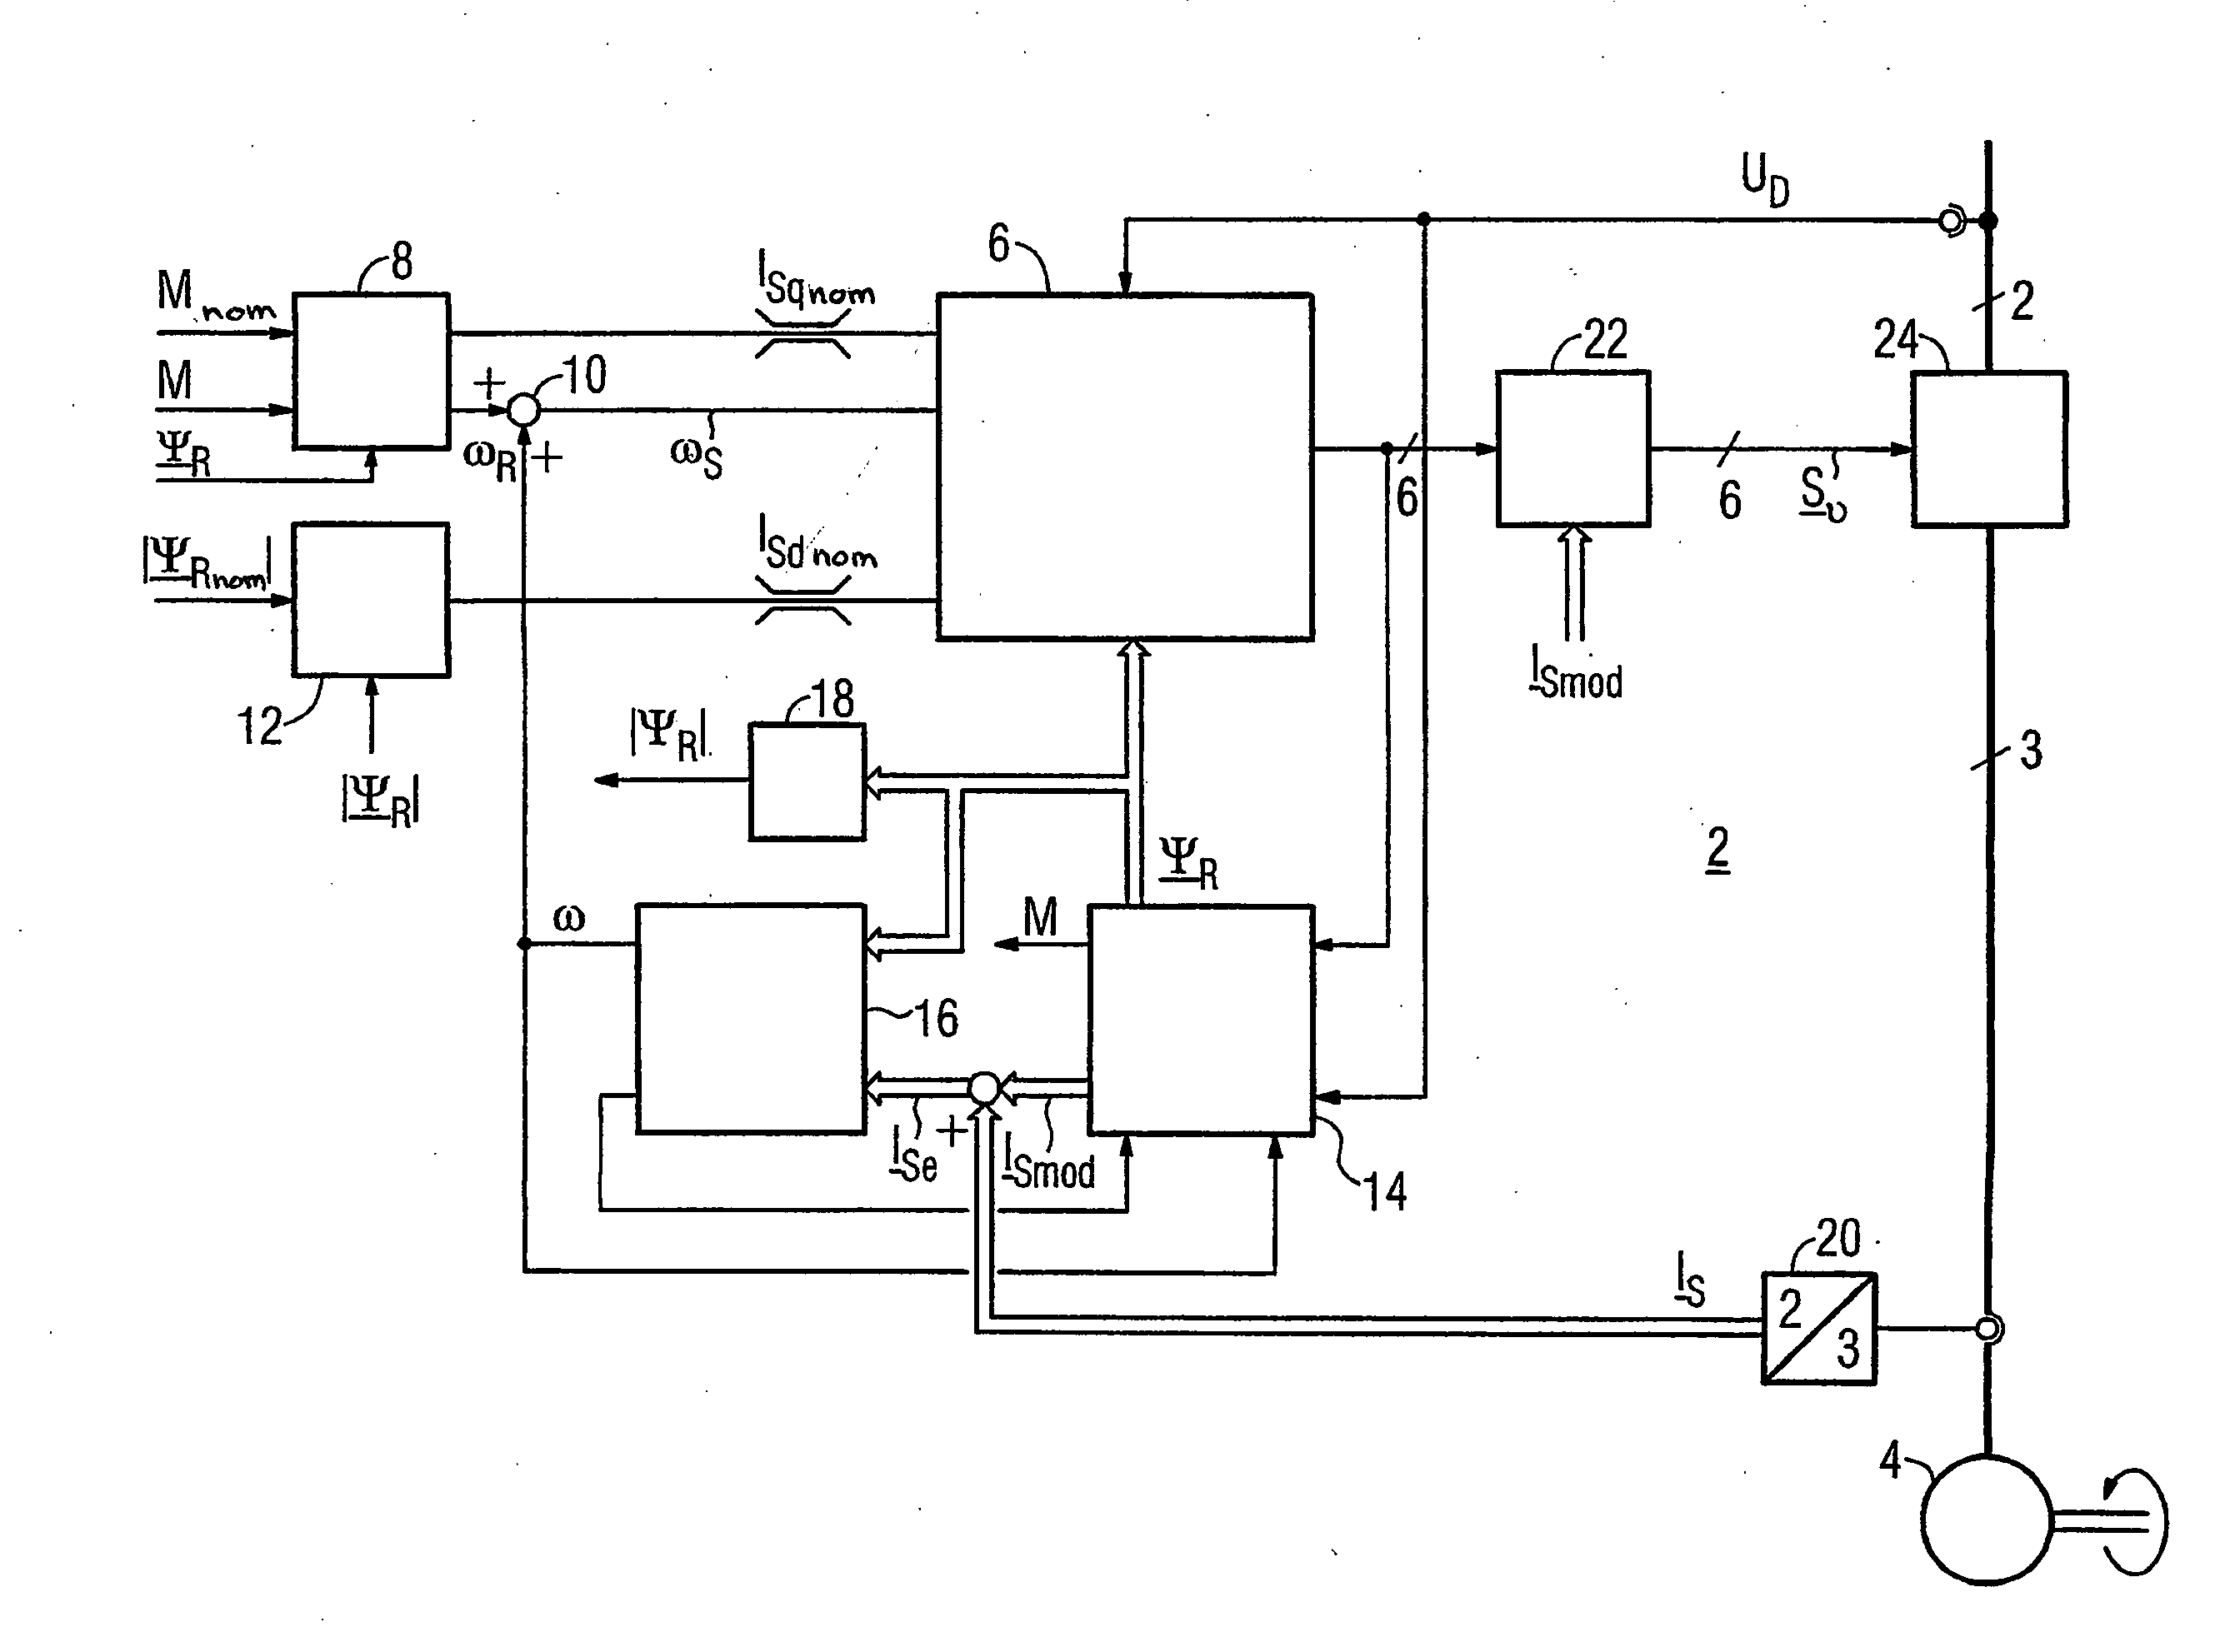 Method for Controlled Application of a Stator Current Set Point Value and of a Torque Set Point Value for a Converter-Fed Rotating-Field Machine